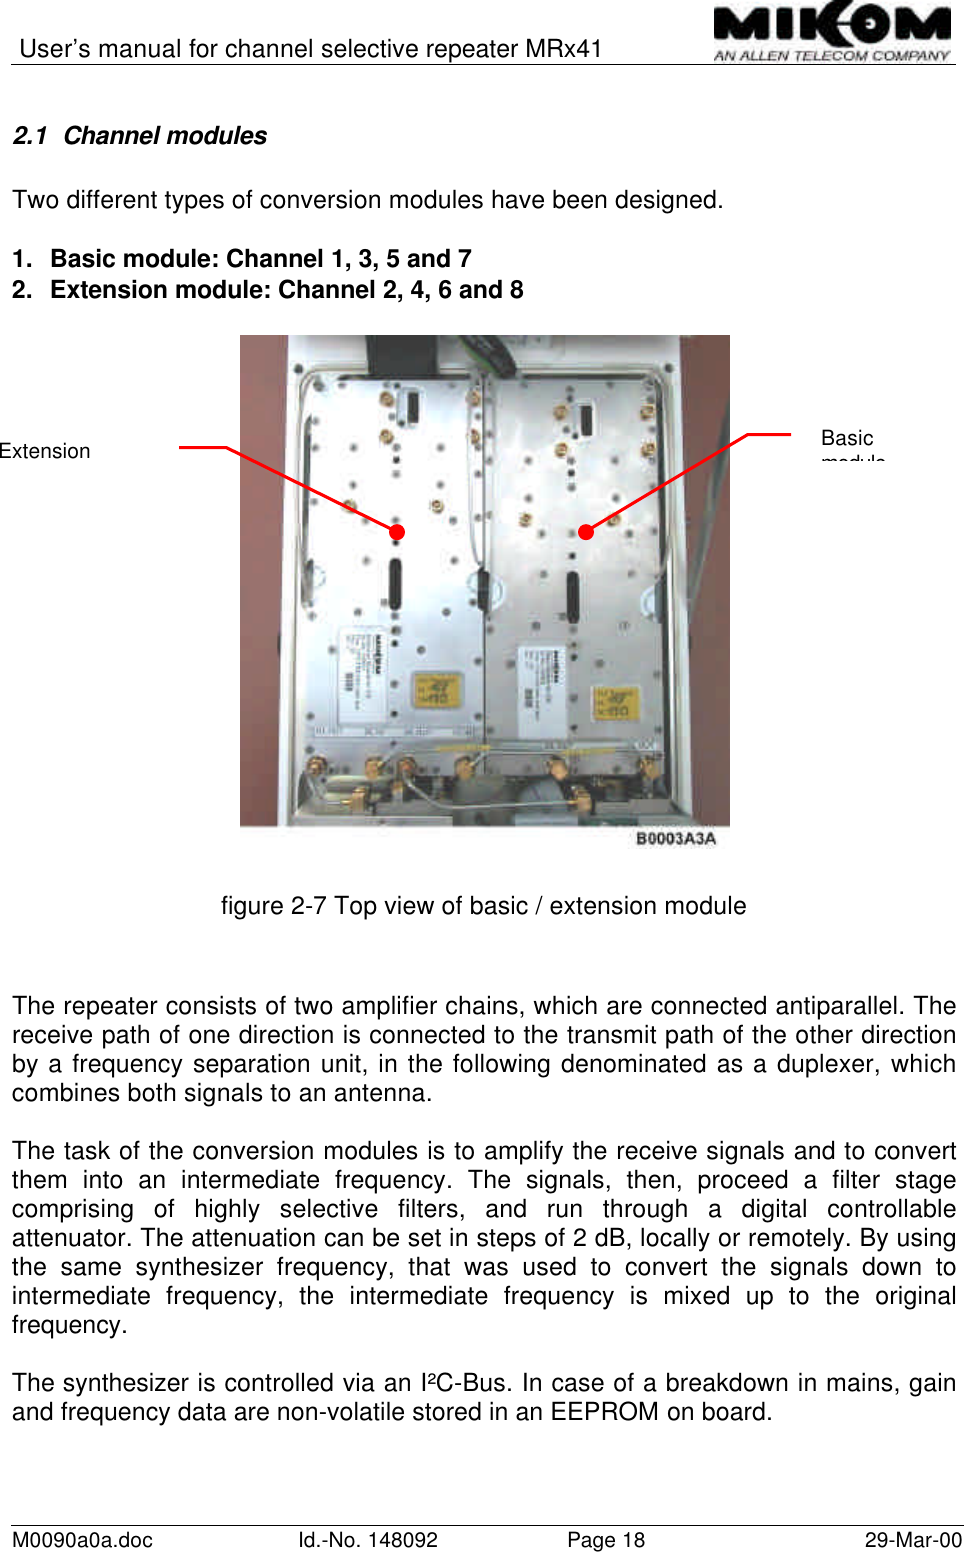 User’s manual for channel selective repeater MRx41M0090a0a.doc Id.-No. 148092 Page 18 29-Mar-002.1 Channel modulesTwo different types of conversion modules have been designed.1. Basic module: Channel 1, 3, 5 and 72. Extension module: Channel 2, 4, 6 and 8figure 2-7 Top view of basic / extension moduleThe repeater consists of two amplifier chains, which are connected antiparallel. Thereceive path of one direction is connected to the transmit path of the other directionby a frequency separation unit, in the following denominated as a duplexer, whichcombines both signals to an antenna.The task of the conversion modules is to amplify the receive signals and to convertthem into an intermediate frequency. The signals, then, proceed a filter stagecomprising of highly selective filters, and run through a digital controllableattenuator. The attenuation can be set in steps of 2 dB, locally or remotely. By usingthe same synthesizer frequency, that was used to convert the signals down tointermediate frequency, the intermediate frequency is mixed up to the originalfrequency.The synthesizer is controlled via an I²C-Bus. In case of a breakdown in mains, gainand frequency data are non-volatile stored in an EEPROM on board.BasicmoduleExtensionmodule